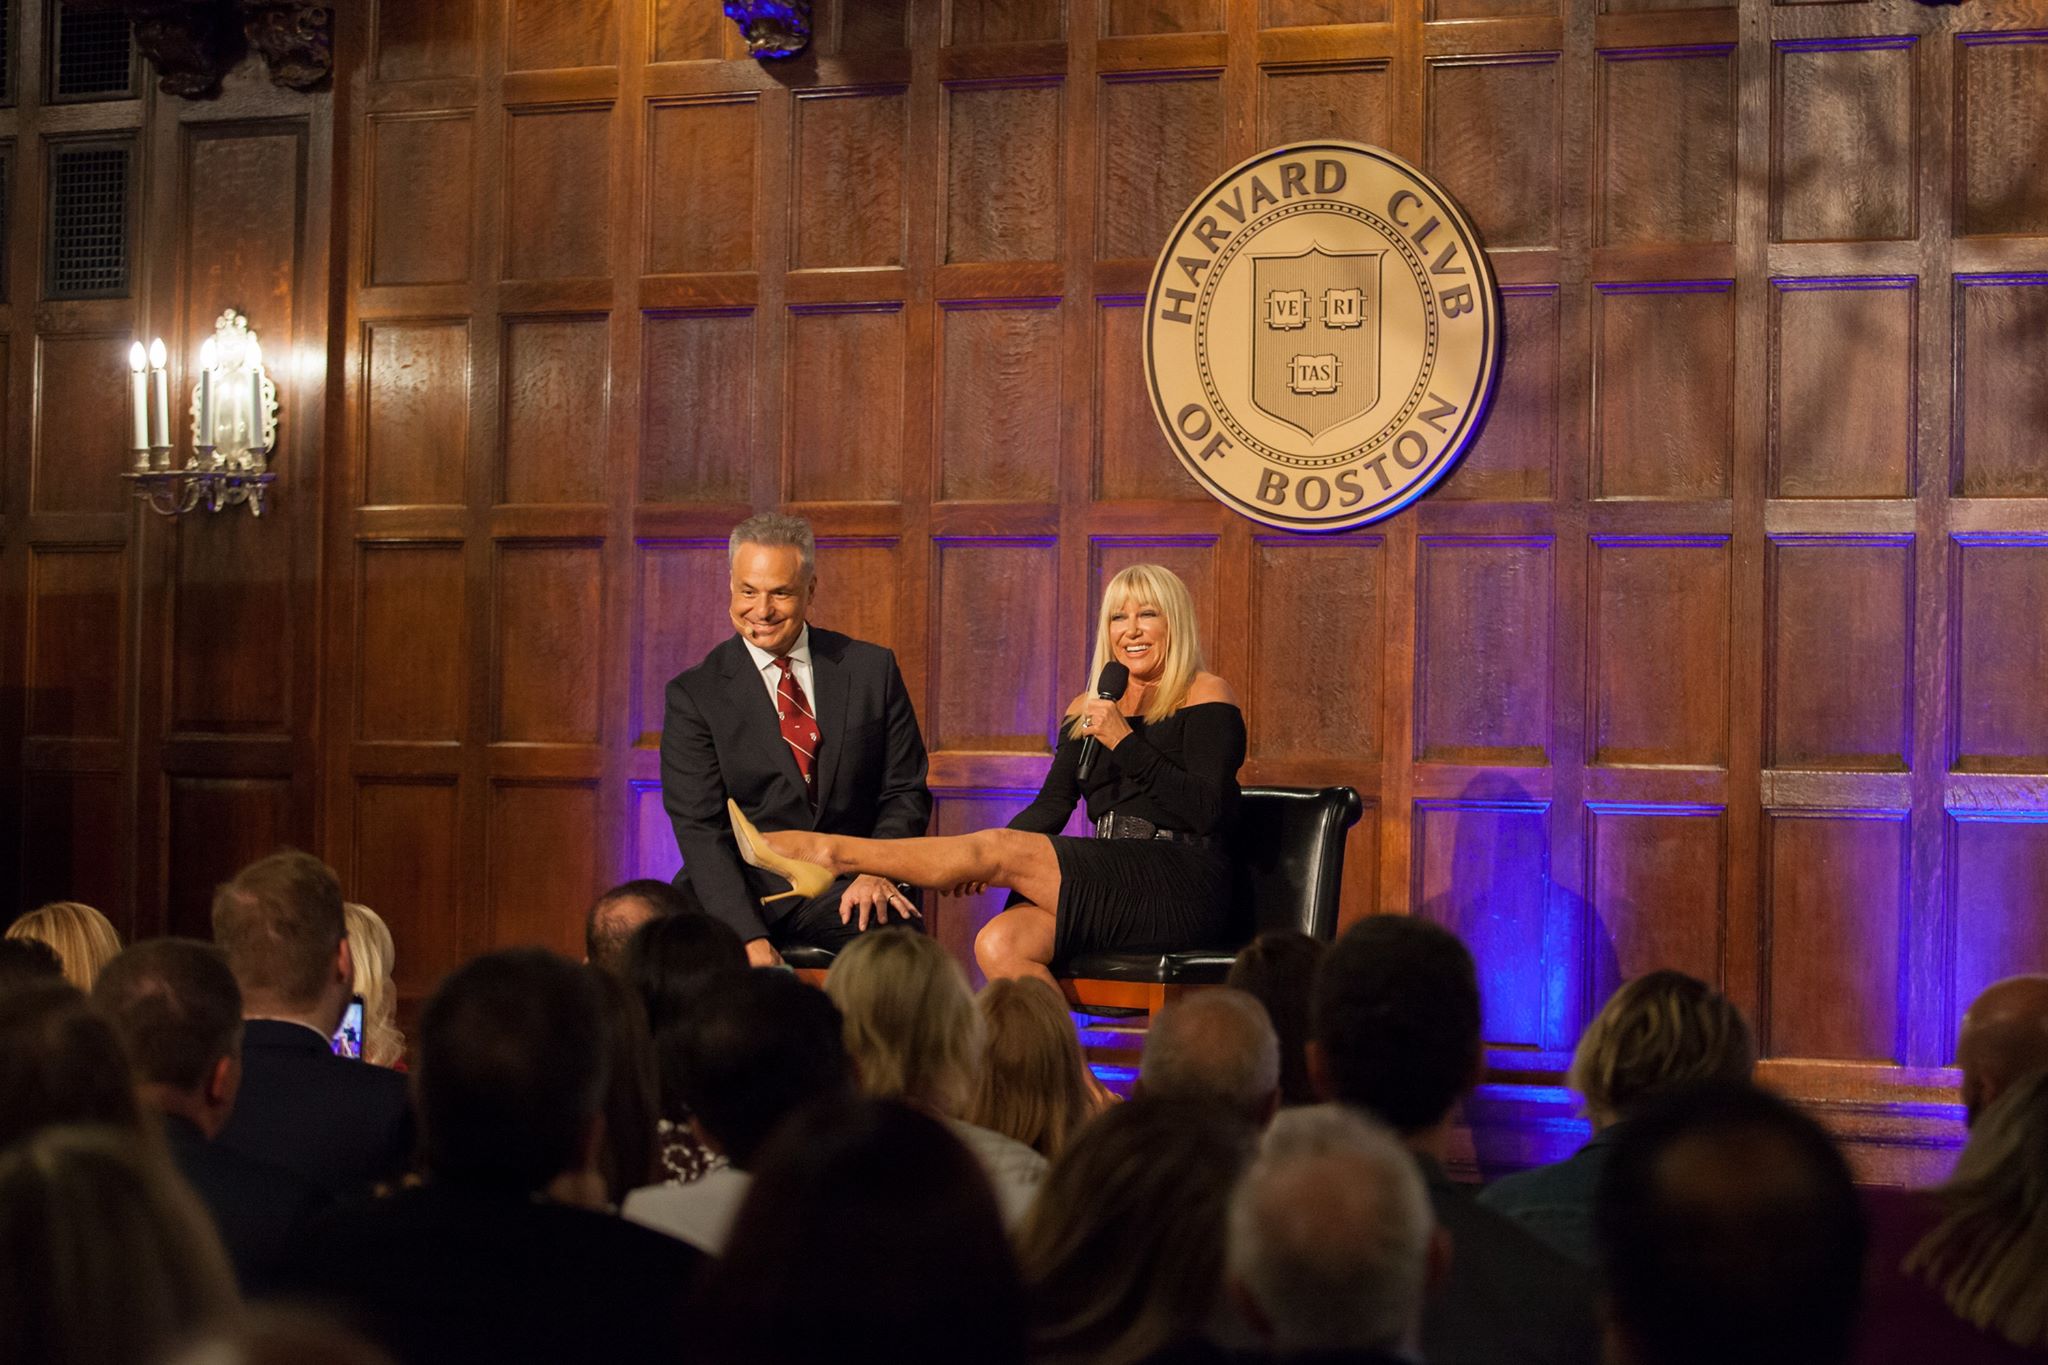 Clint Arthur with Suzanne Somers at Harvard Club of Boston